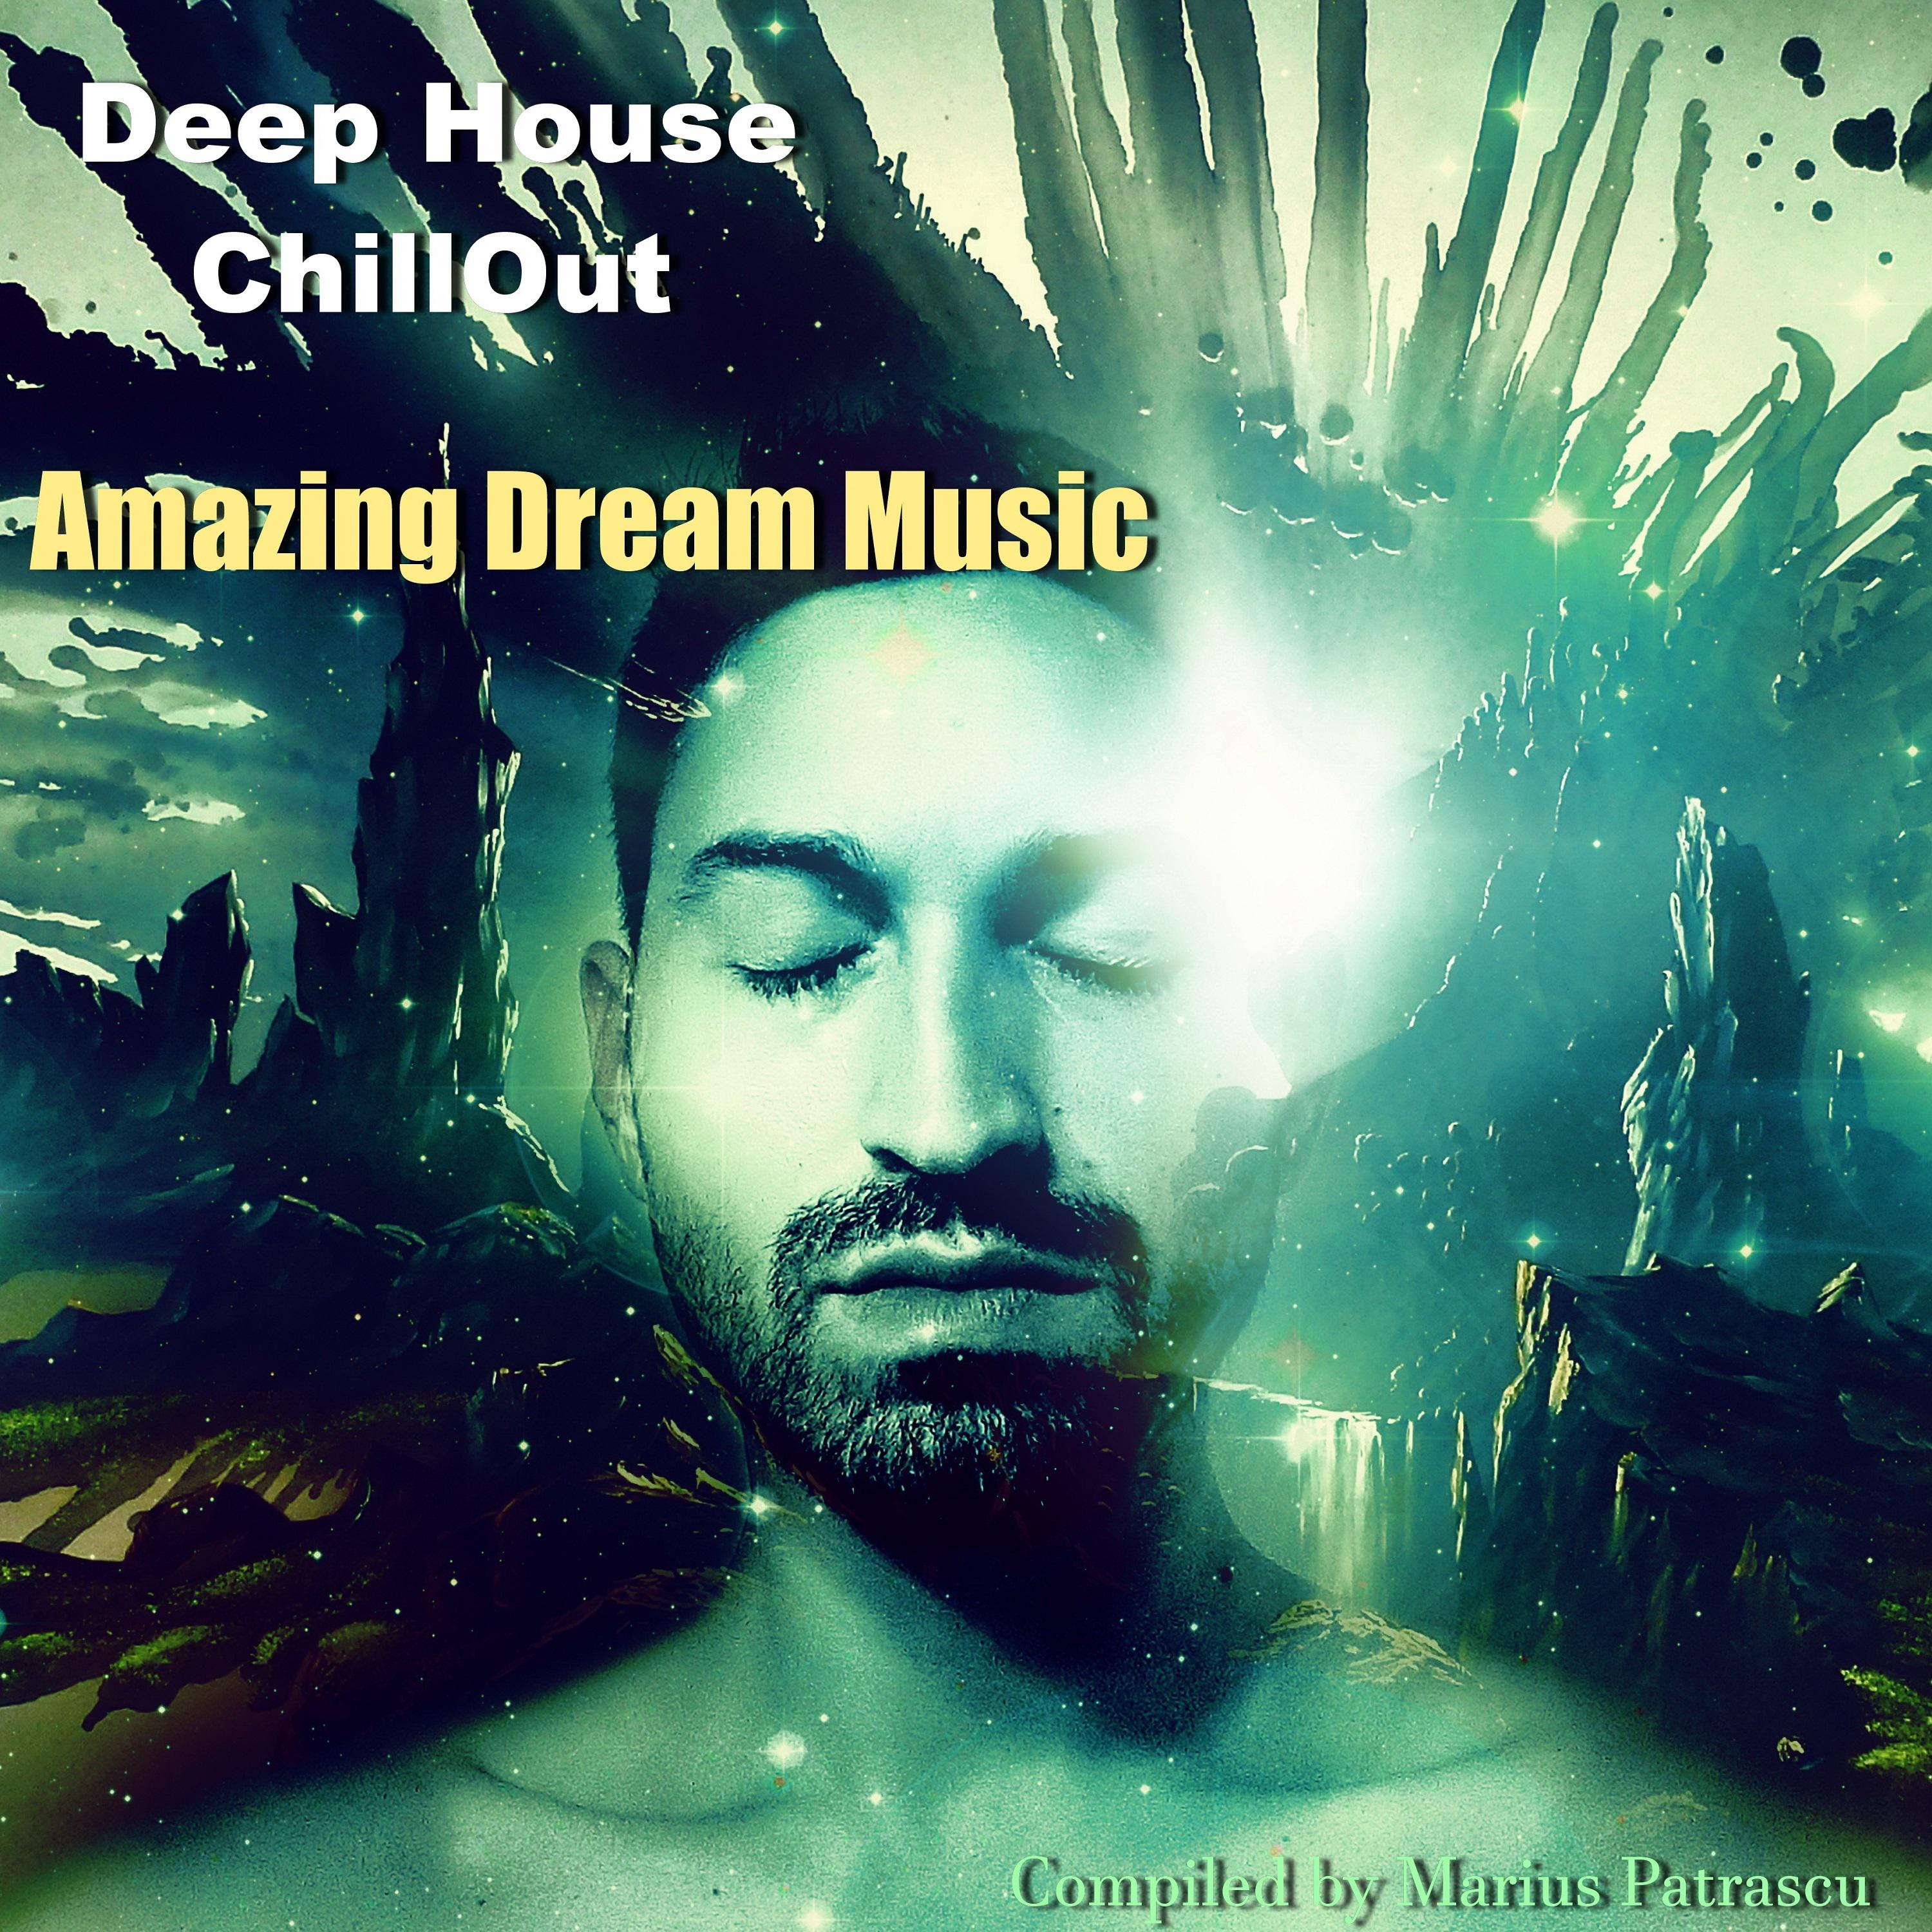 Deep House Chillout Amazing Dream Music (Mixed By Marius Patrascu) [Continuous DJ Mix]